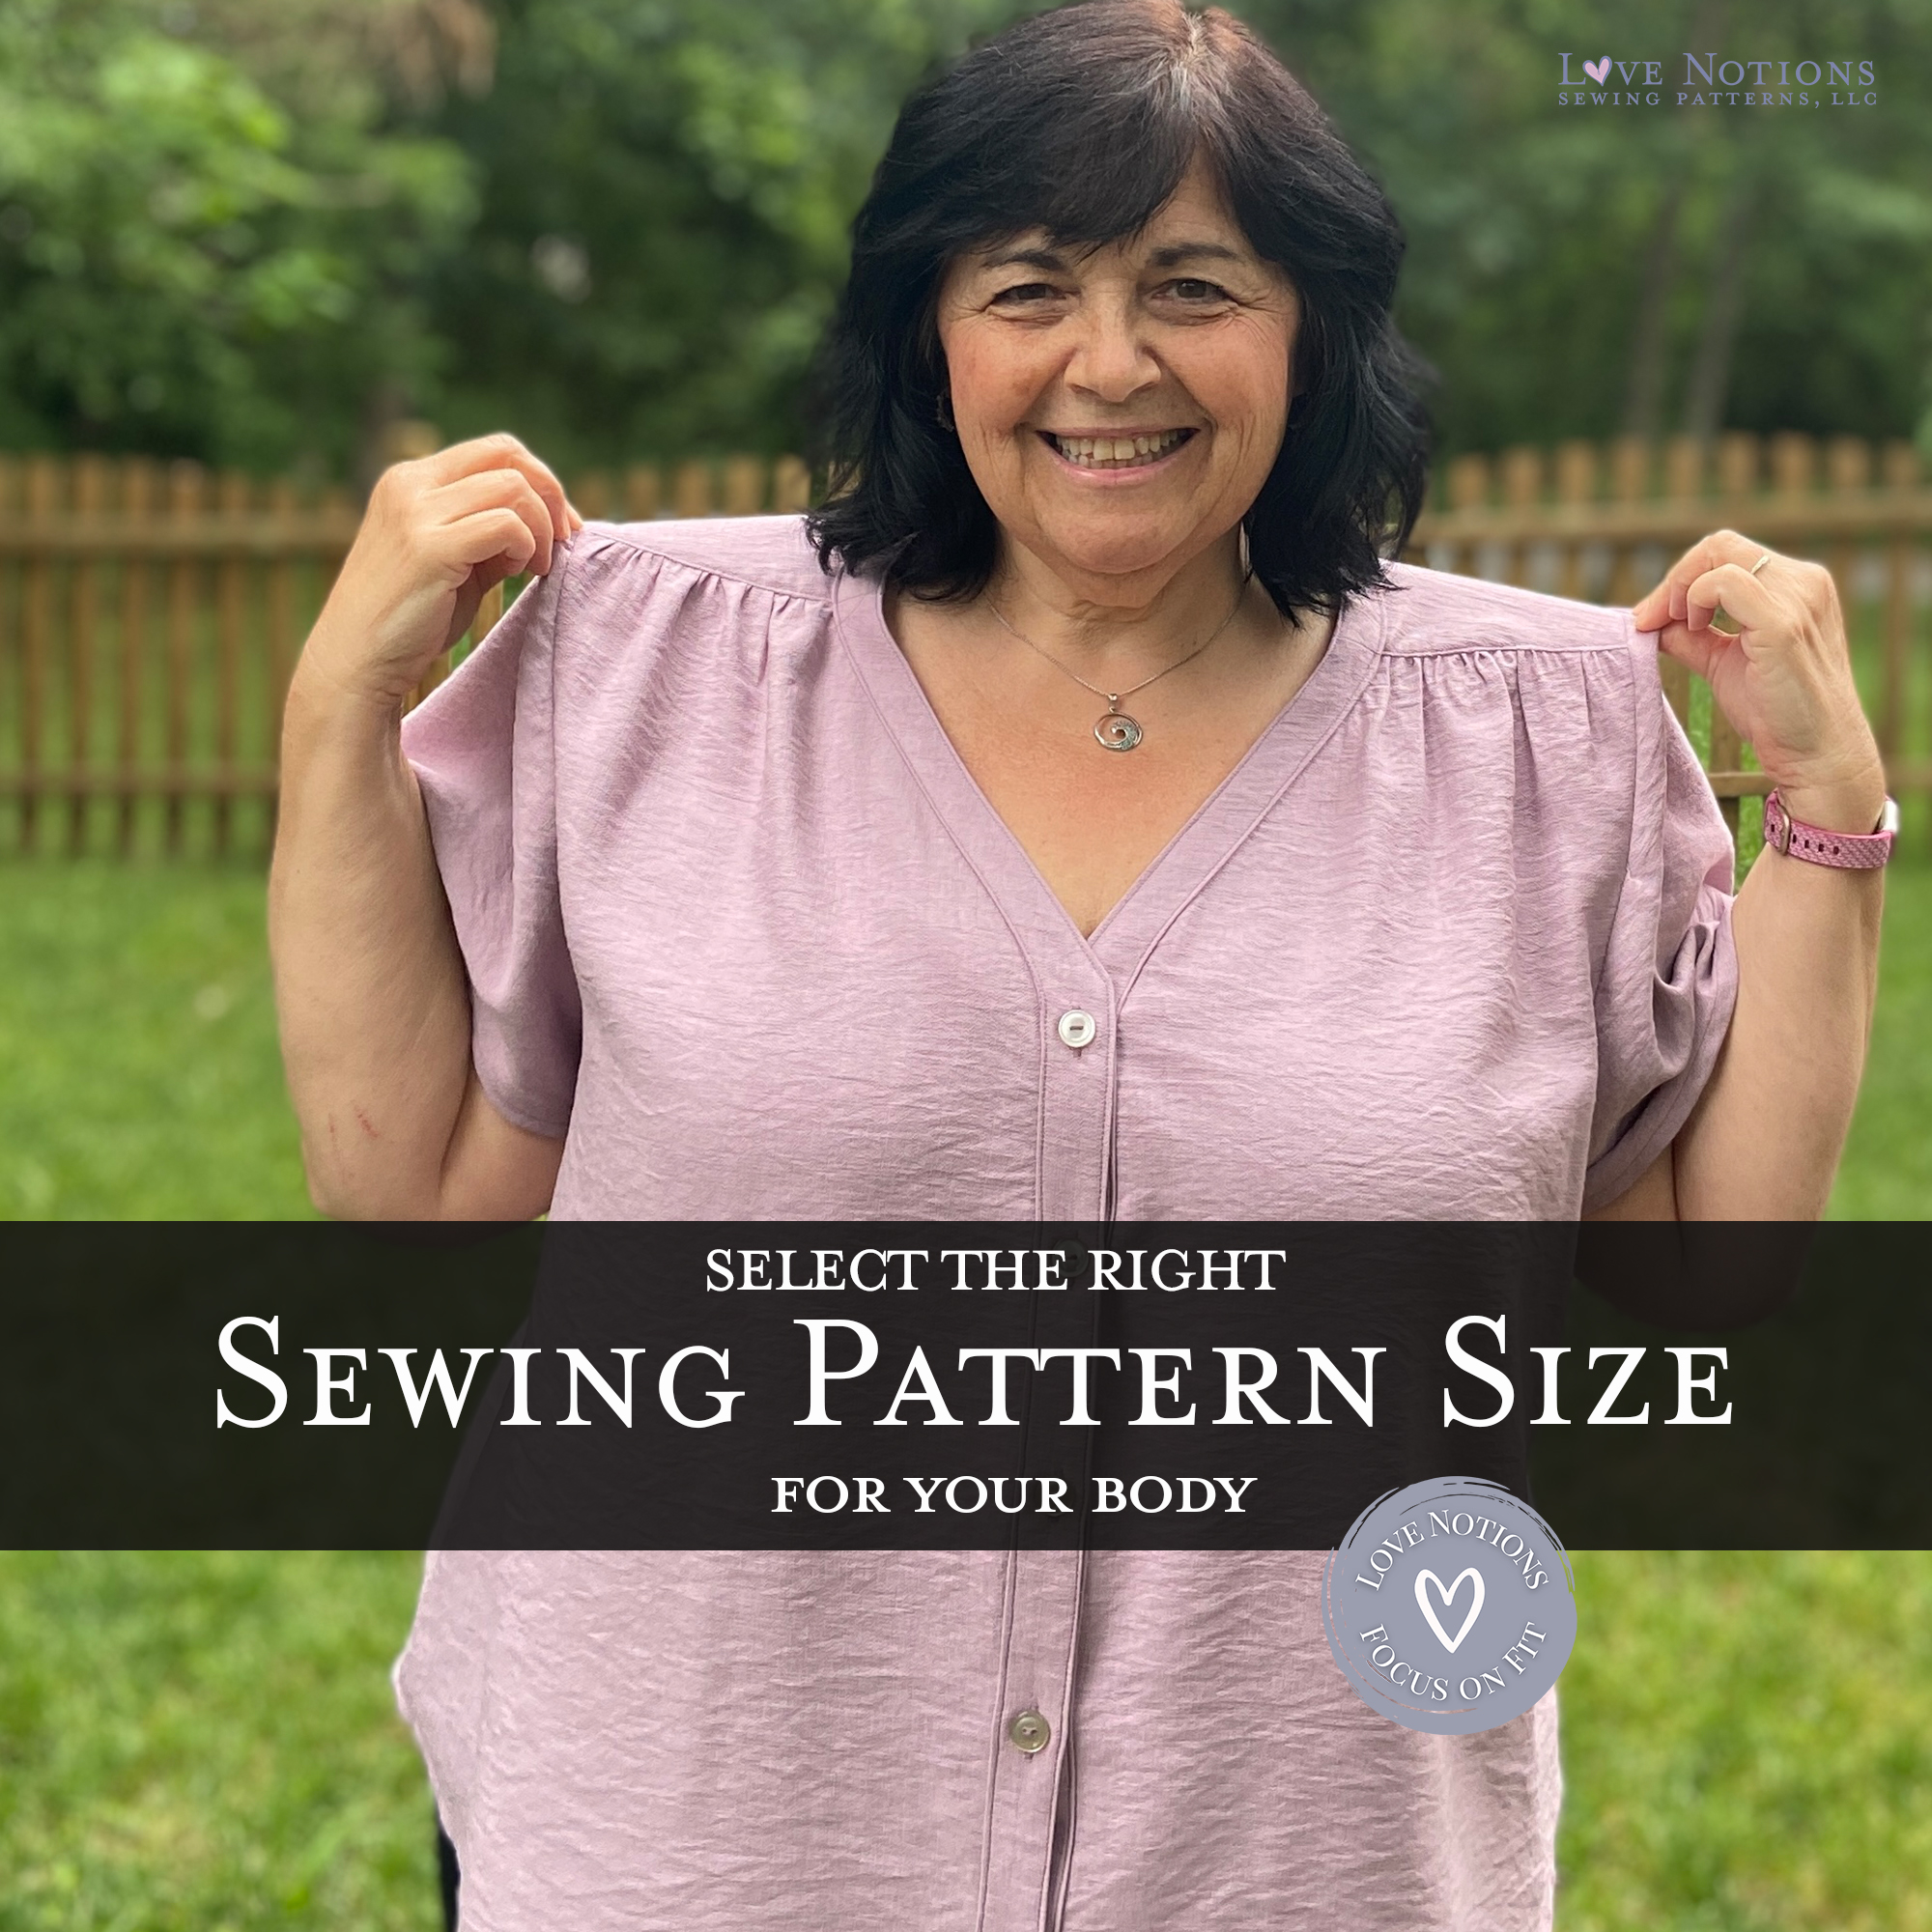 FOCUS ON FIT: Why Should I Use High Bust When Determining My Pattern Size?  - Love Notions Sewing Patterns